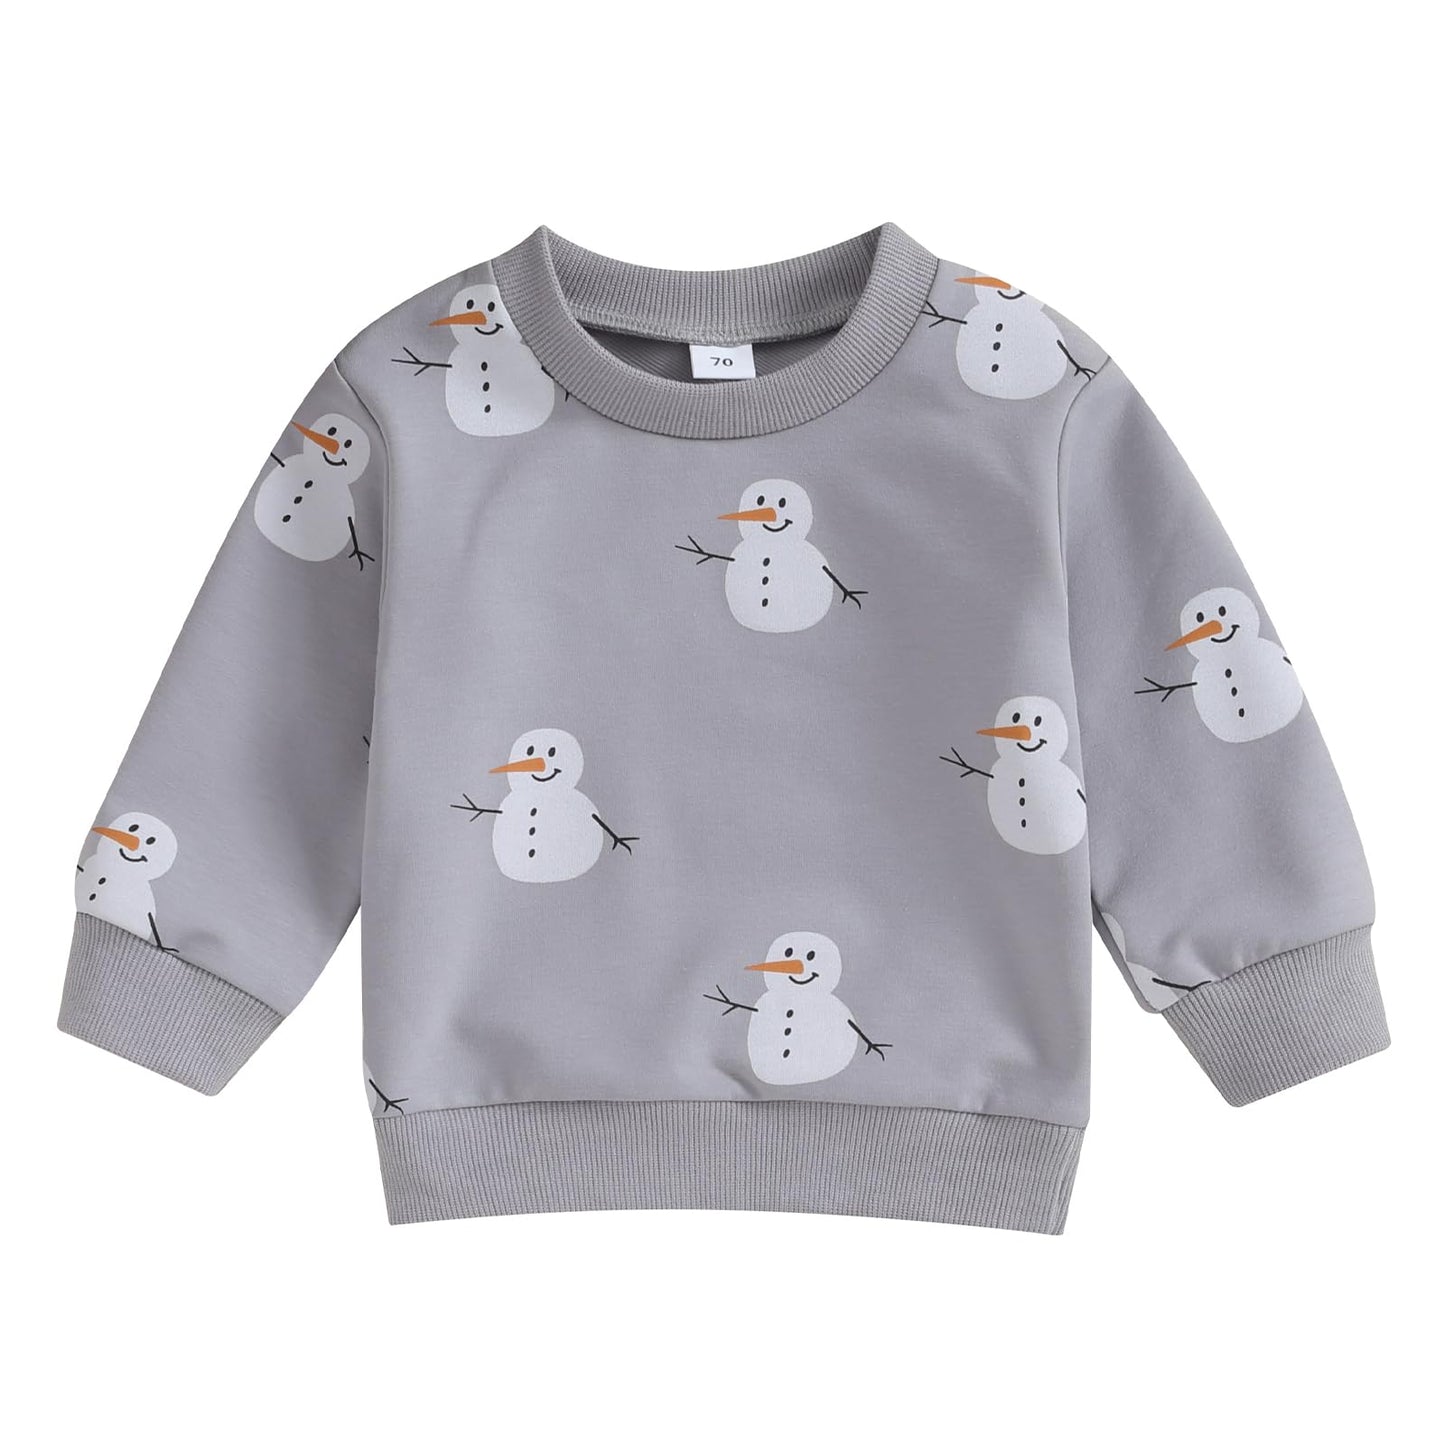 Lucikamy Toddler Baby Boy Girl Christmas Sweatshirt Letter Print Long Sleeve Crewneck Pullover Top Fall Winter Clothes